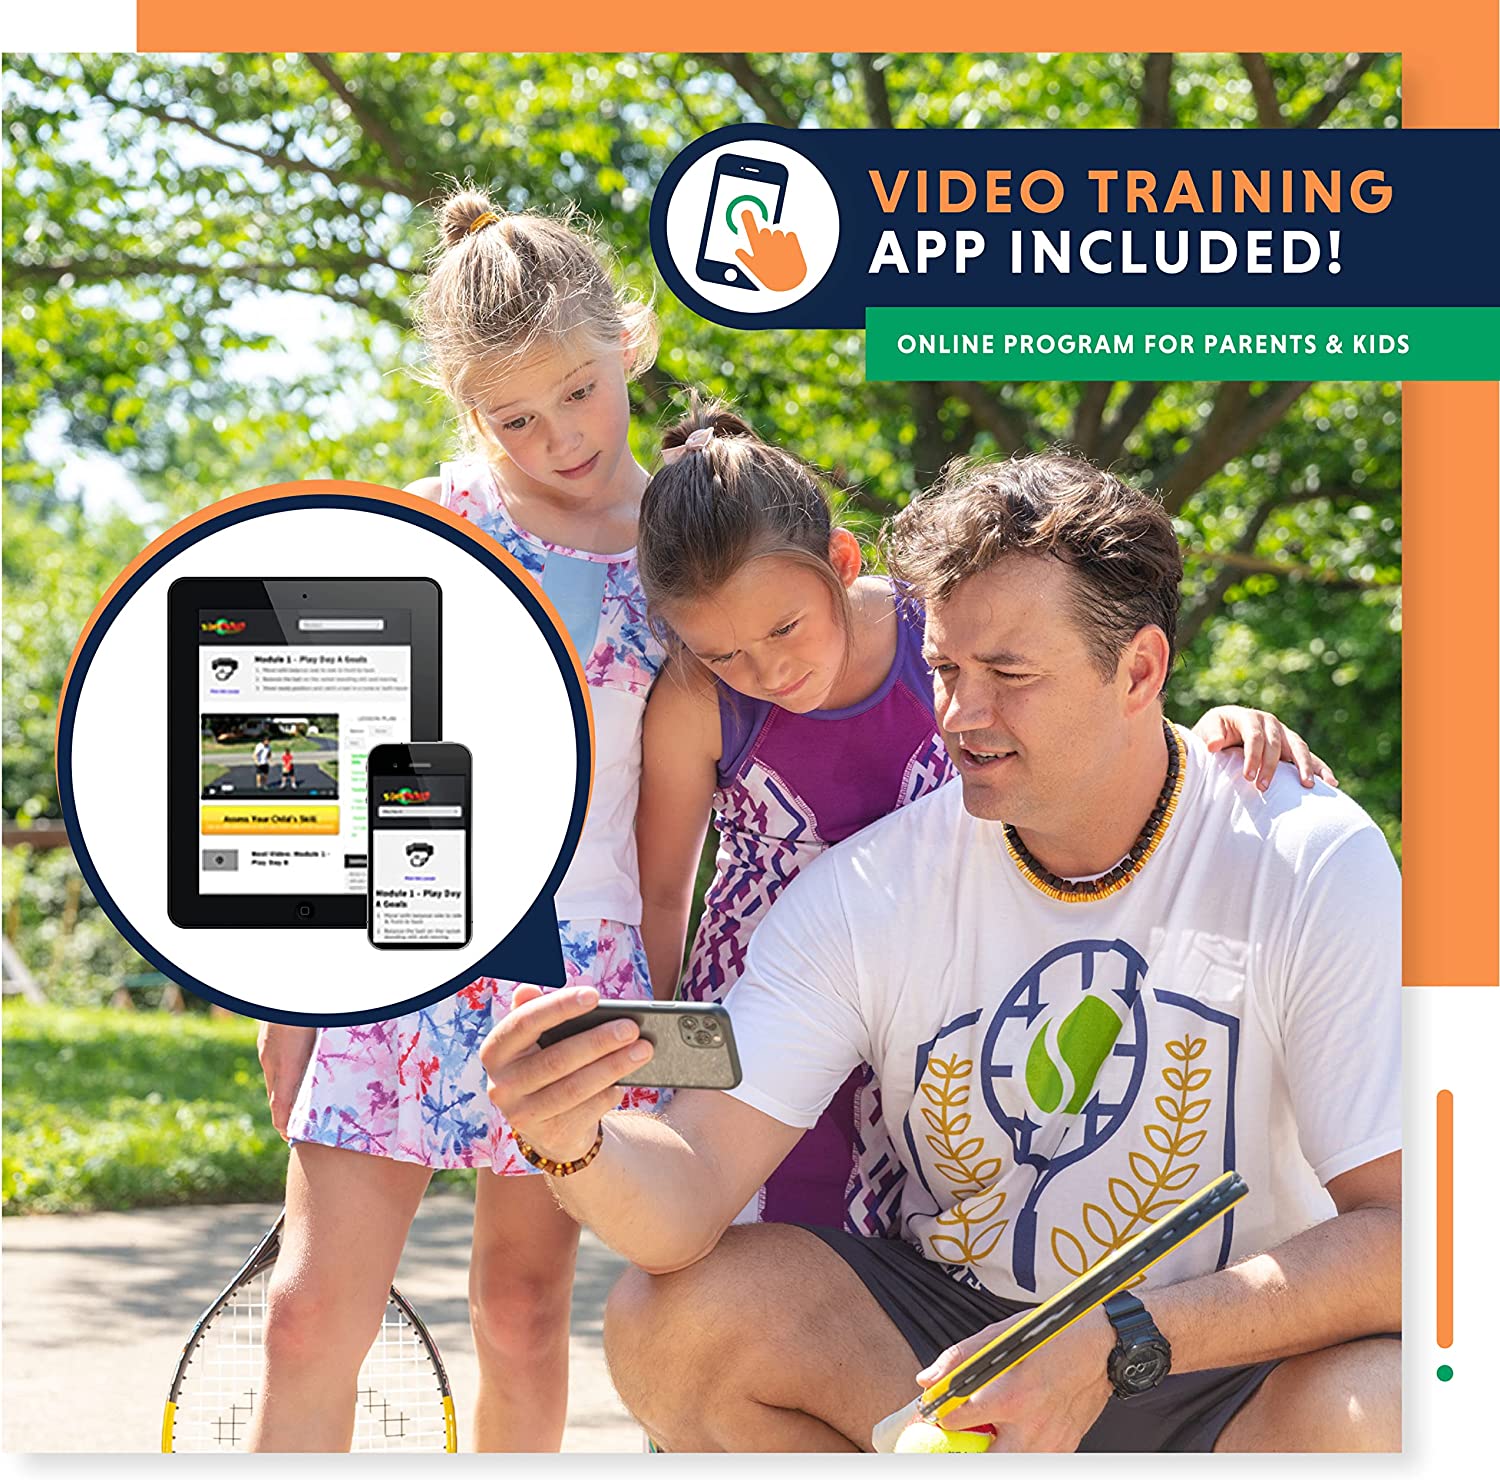 Tennis Racket for Kids with Training Videos by Street Tennis Club Proper  Equipment Helps You Learn Faster and Play Better 19